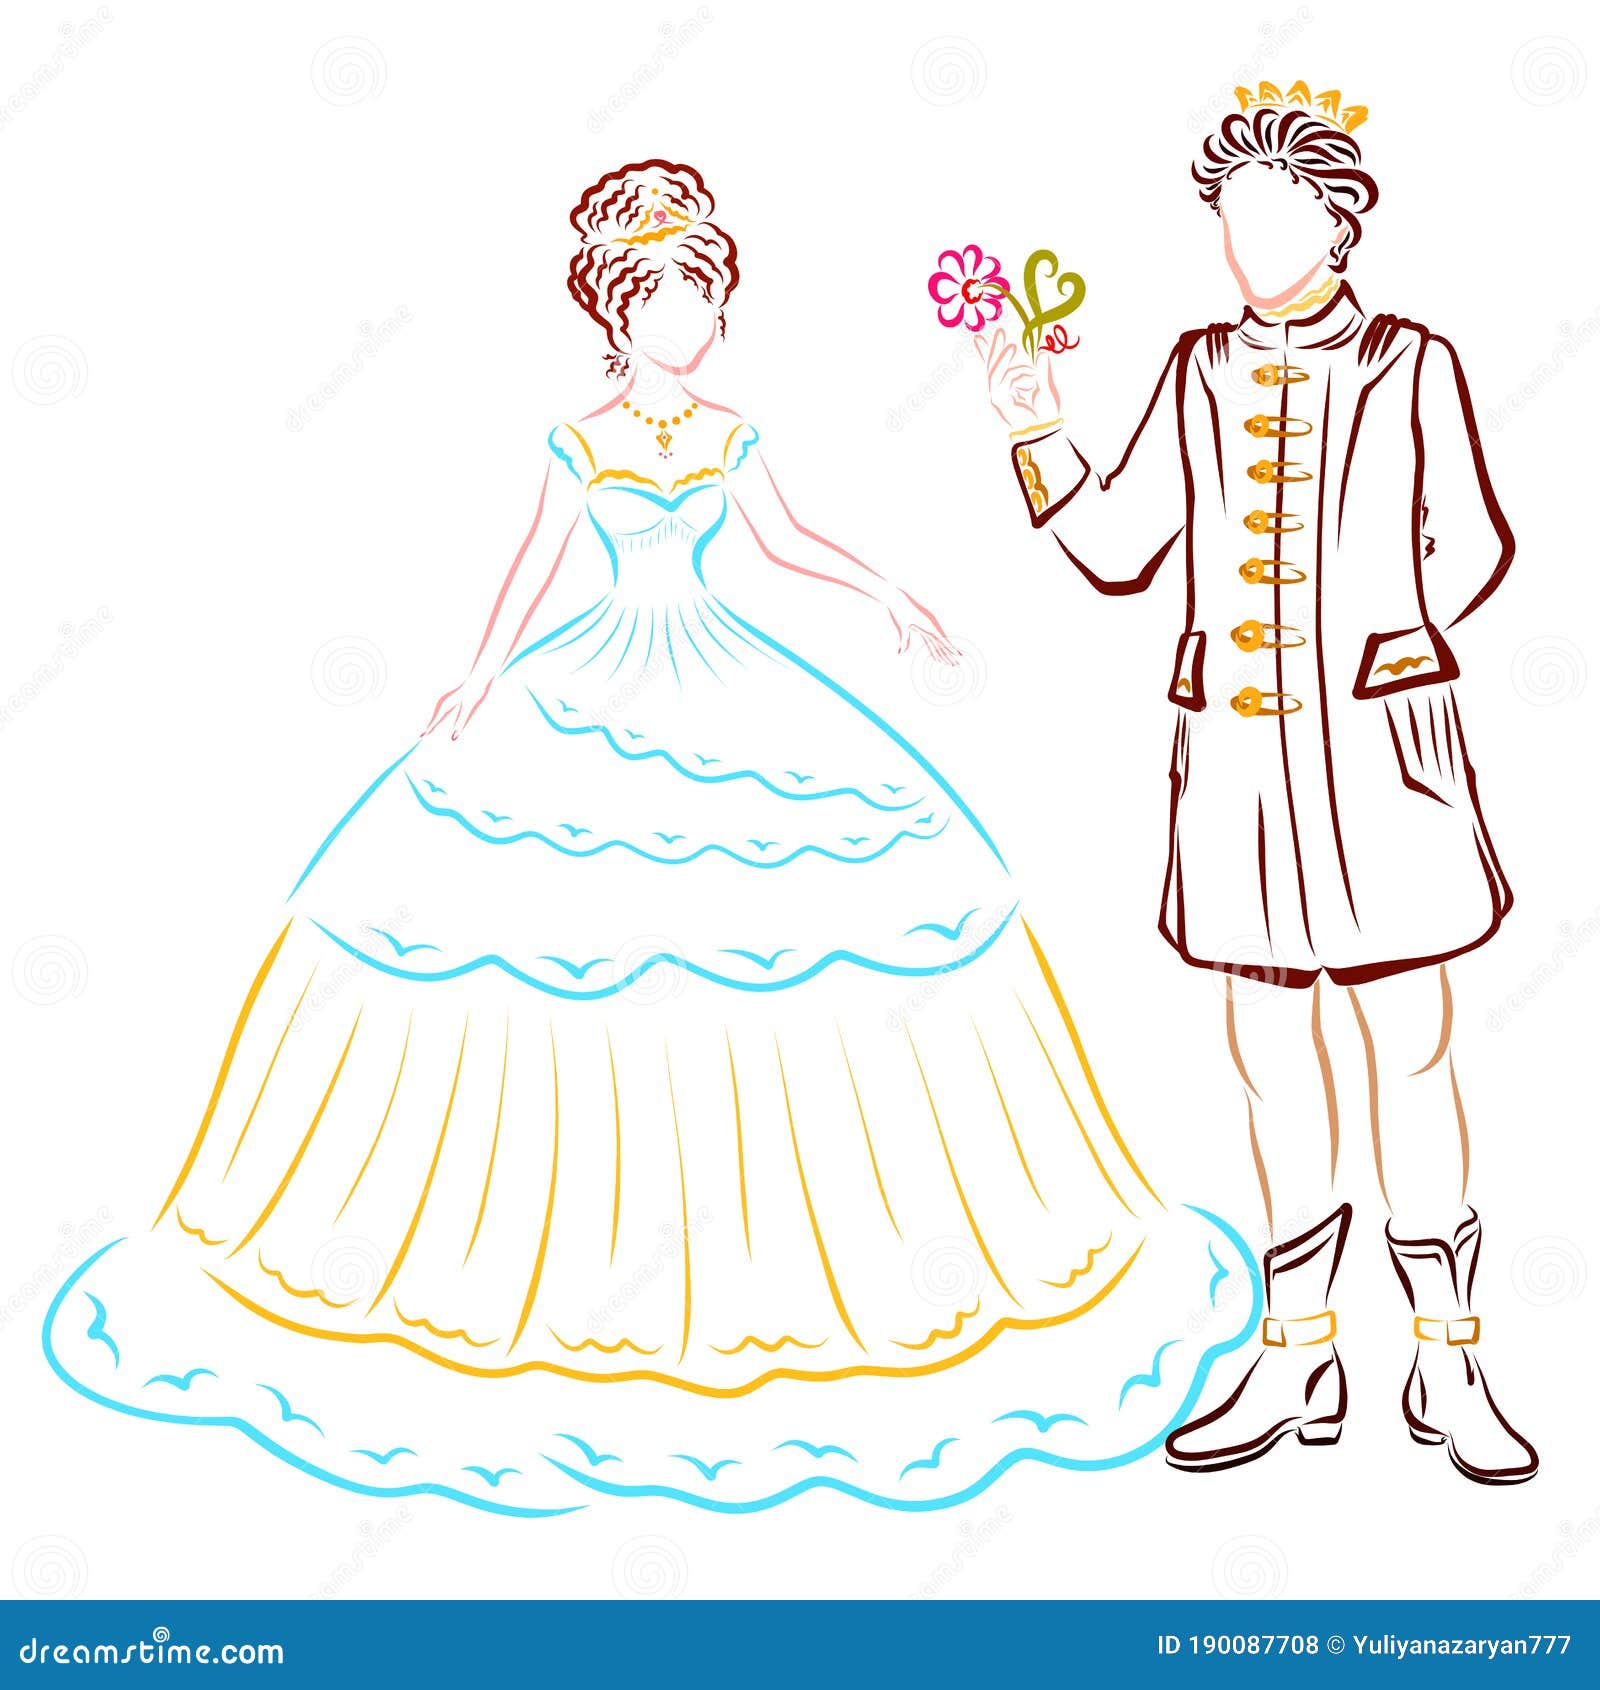 Prince Gives The Princess A Flower With A Heart Stock Illustration Illustration Of Design Courtship